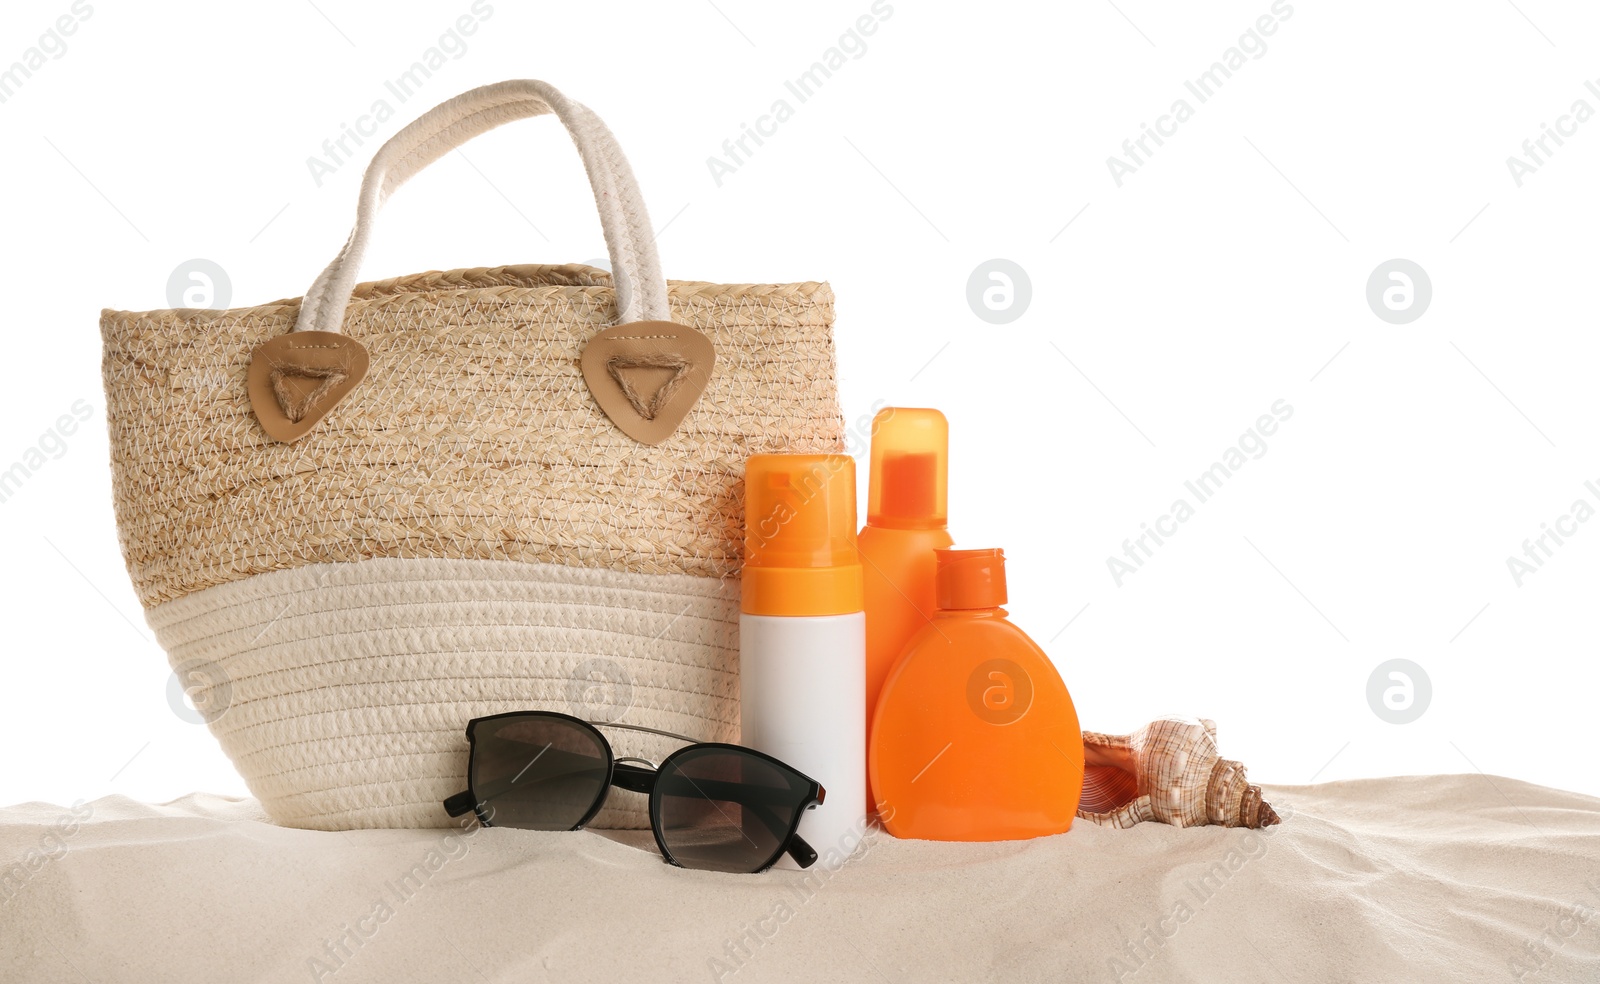 Photo of Stylish bag and different beach accessories on sand against white background